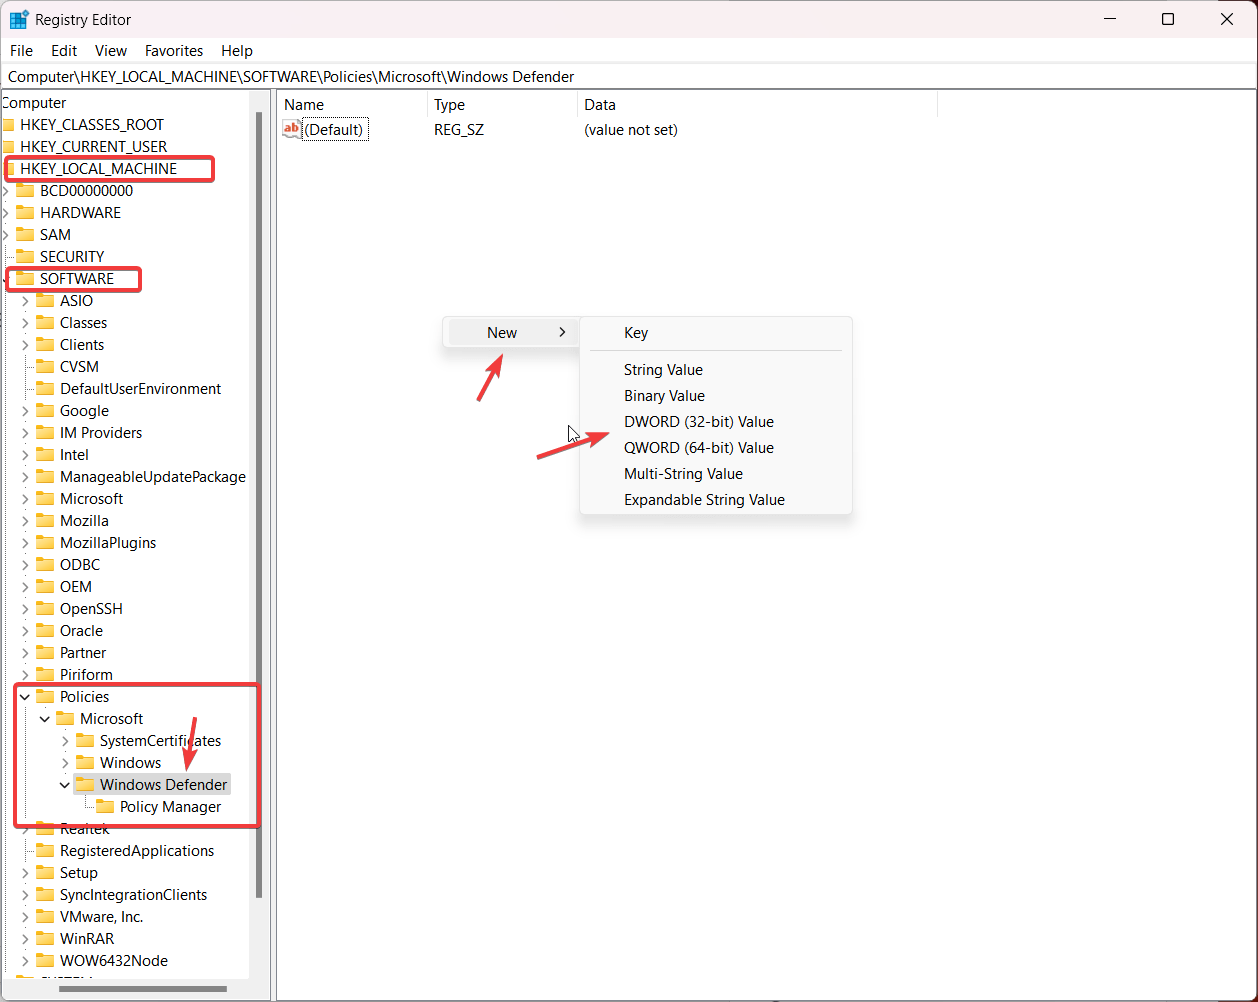 Create new entery for Window defender in registery